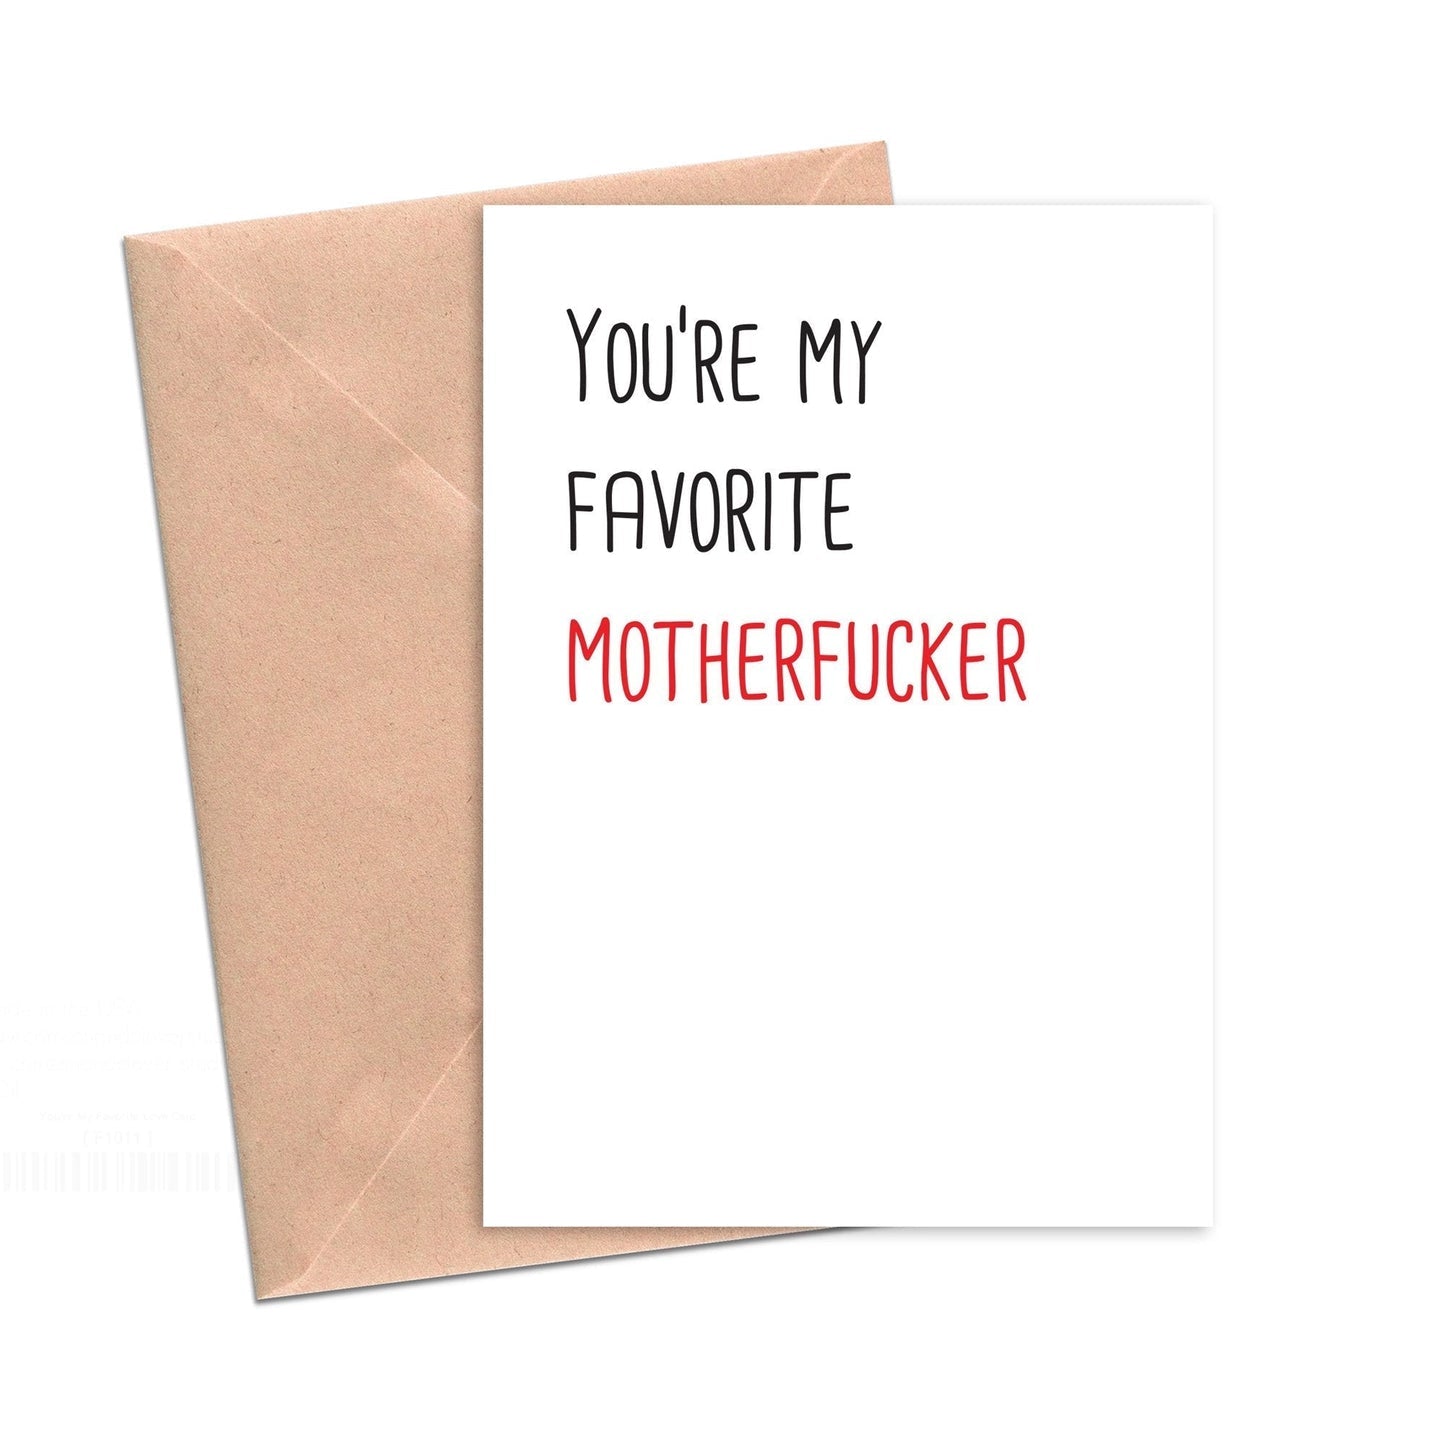 You’re My Favorite Motherfucker Card